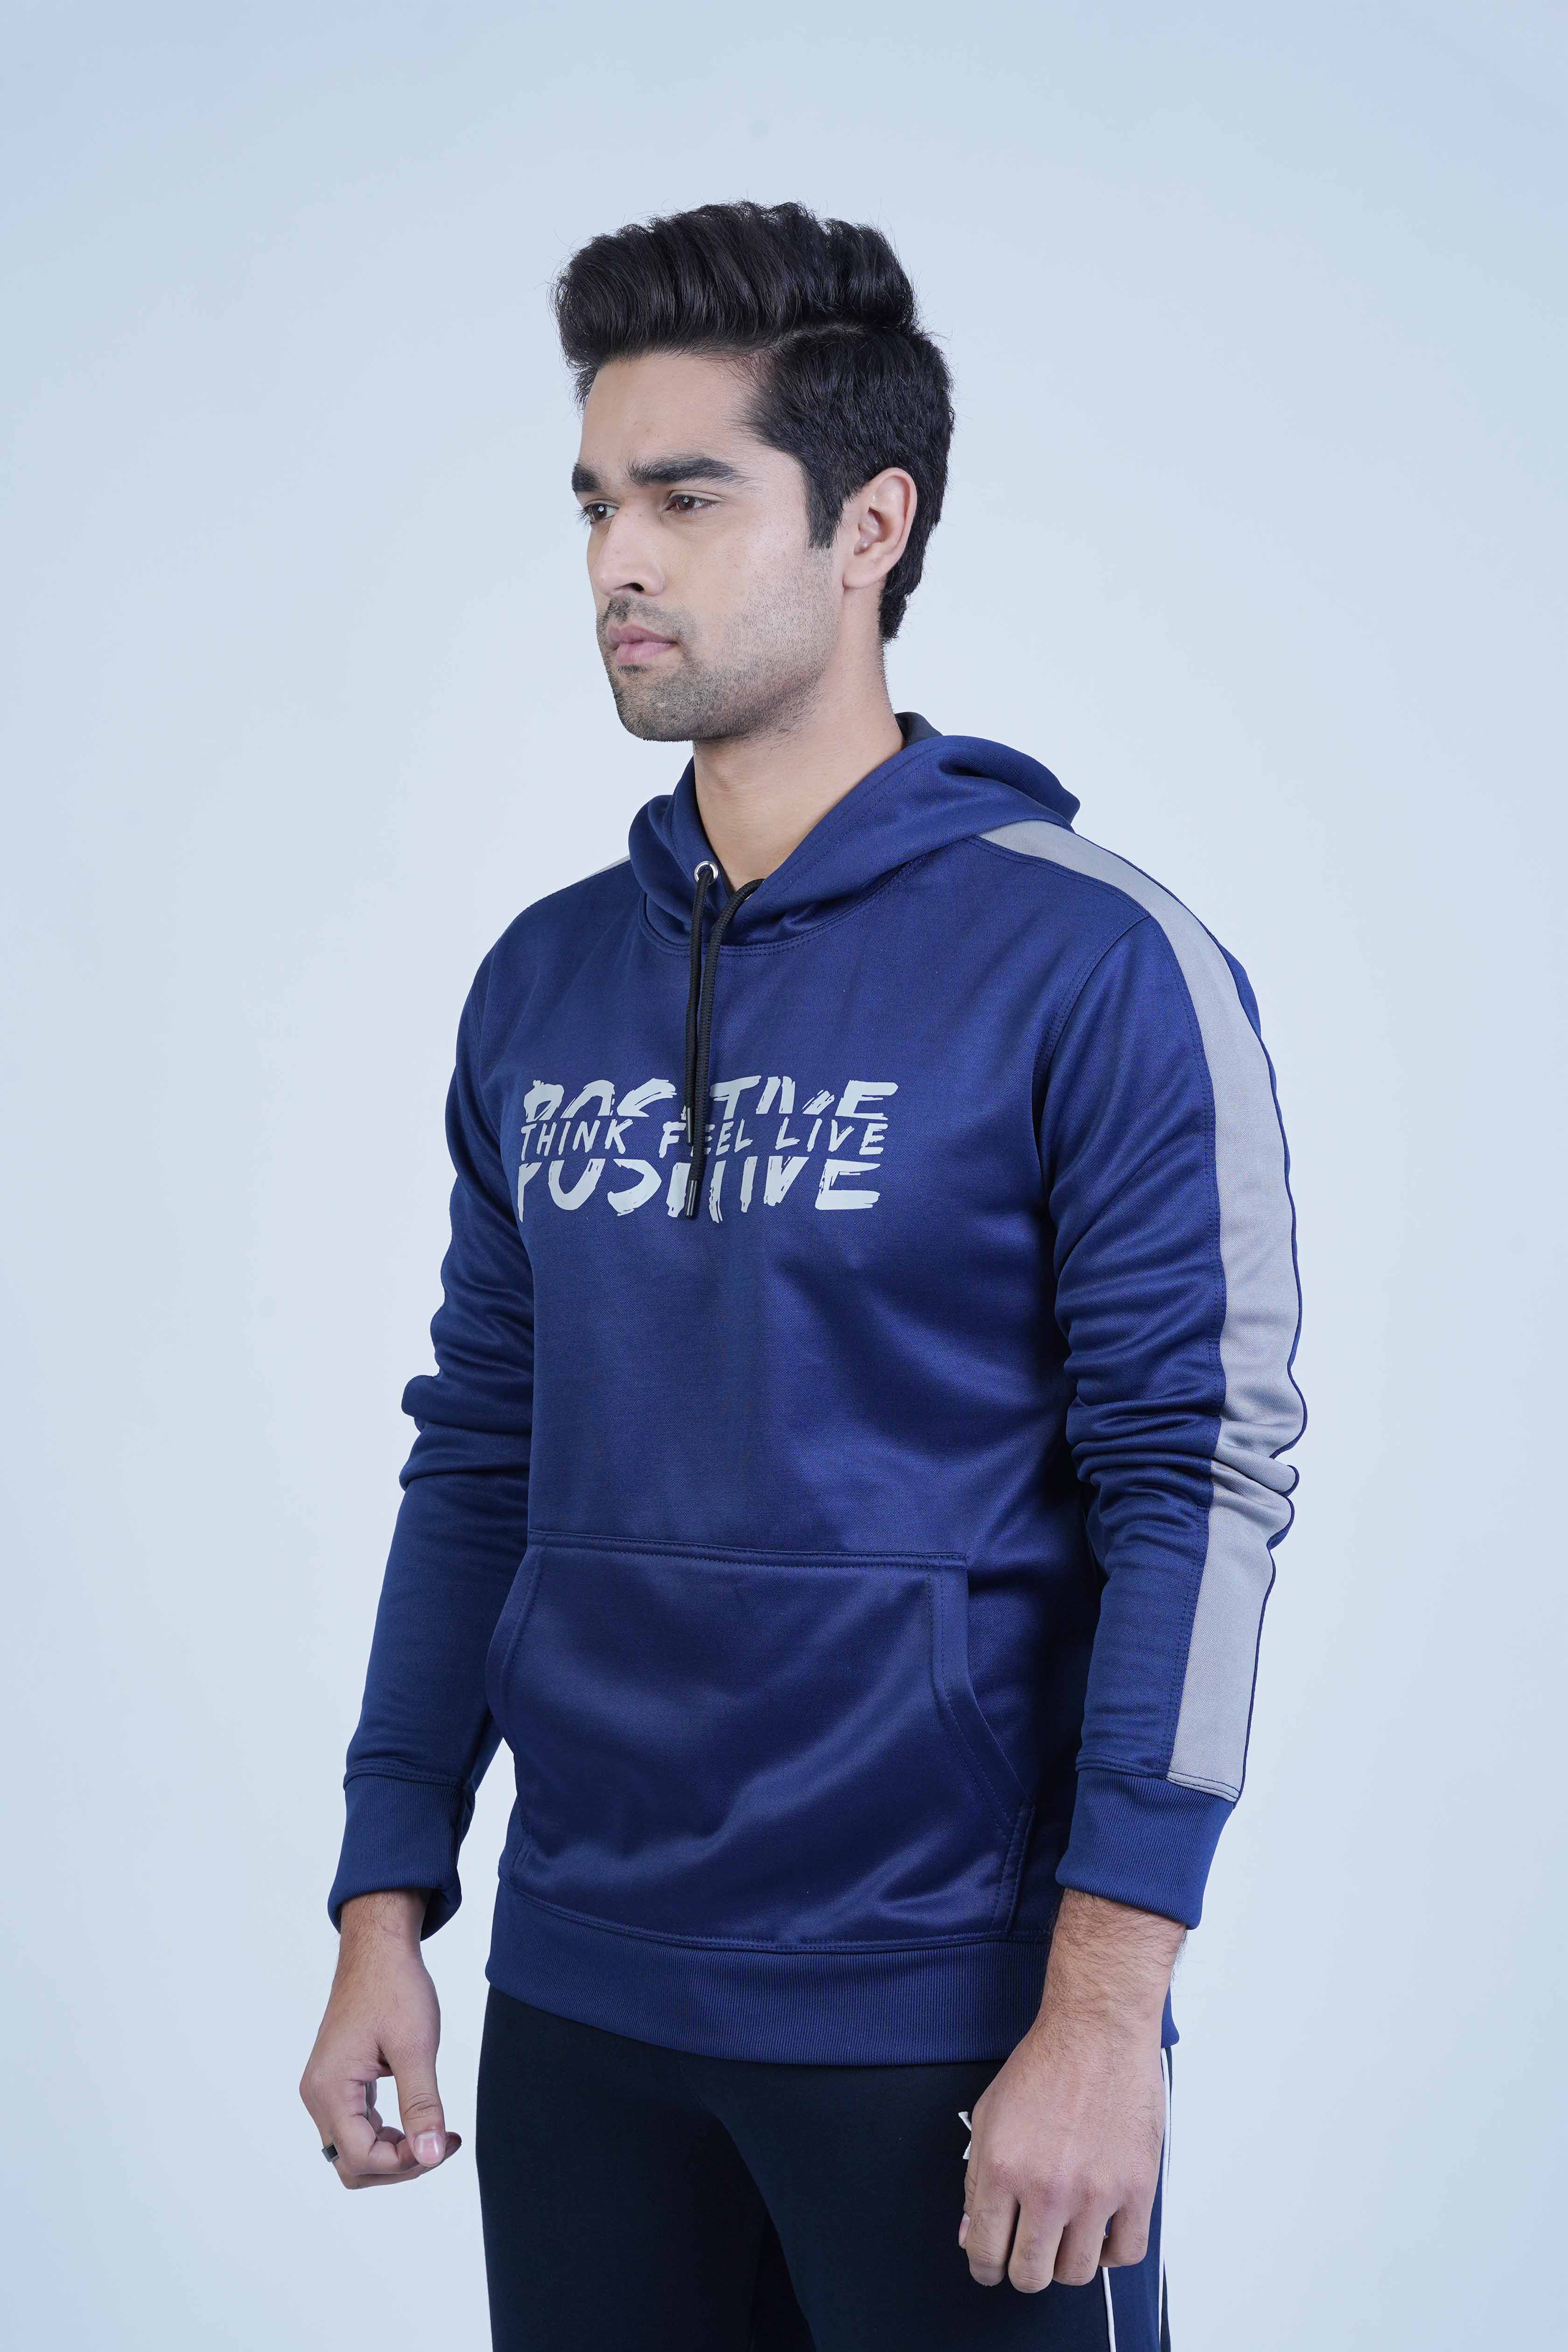 The Xea Positive Hoodie Men's Collection